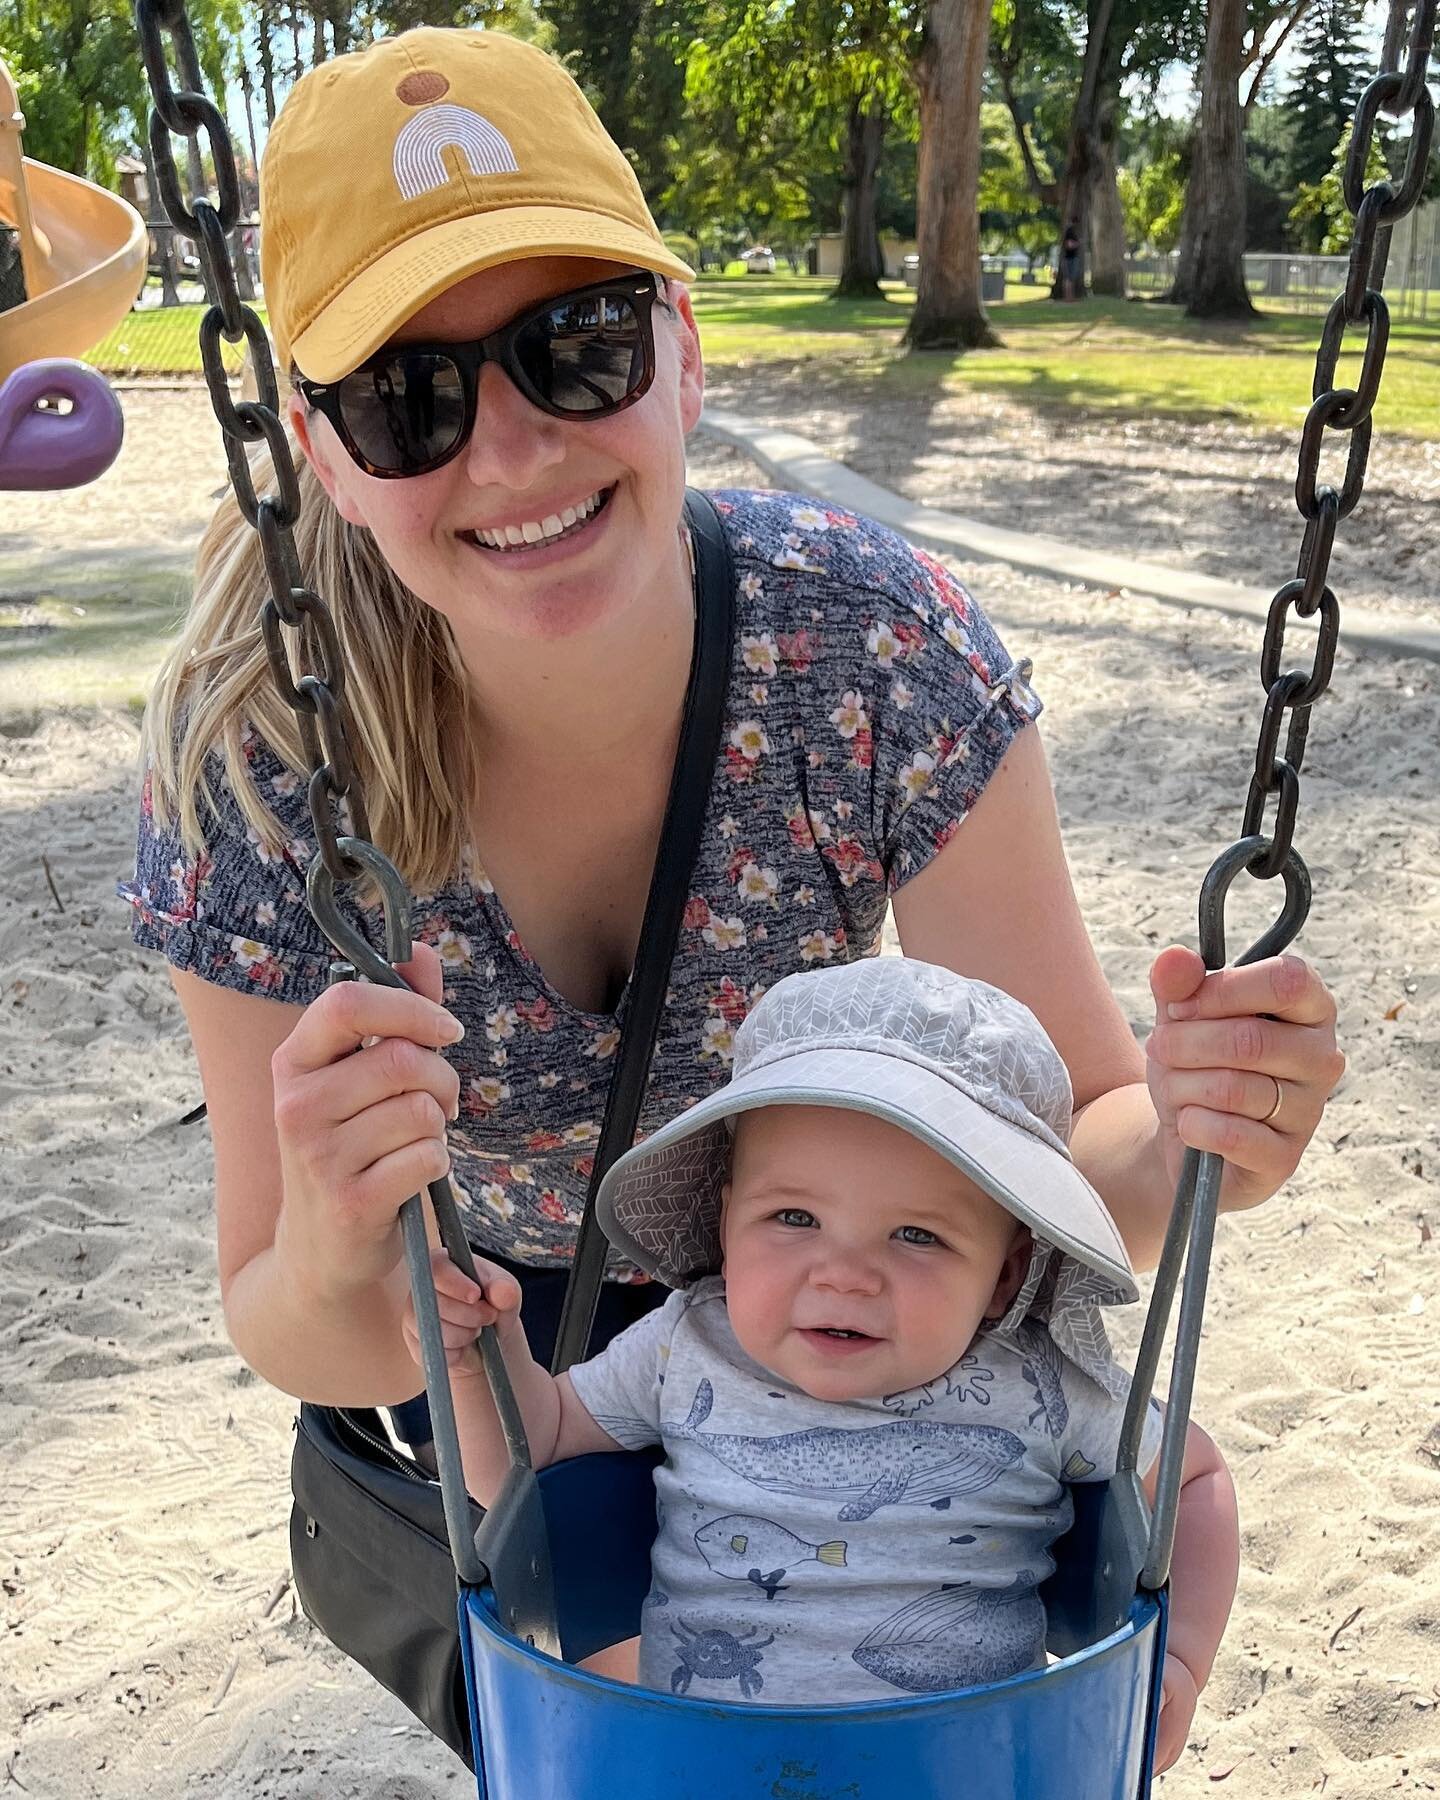 Hey there! It&rsquo;s Cara from Left Lane Digital. Maybe you&rsquo;ve noticed I haven&rsquo;t posted in over a year. It&rsquo;s because I&rsquo;ve been busy with this little one! Having my own business has allowed me to be able to spend this precious